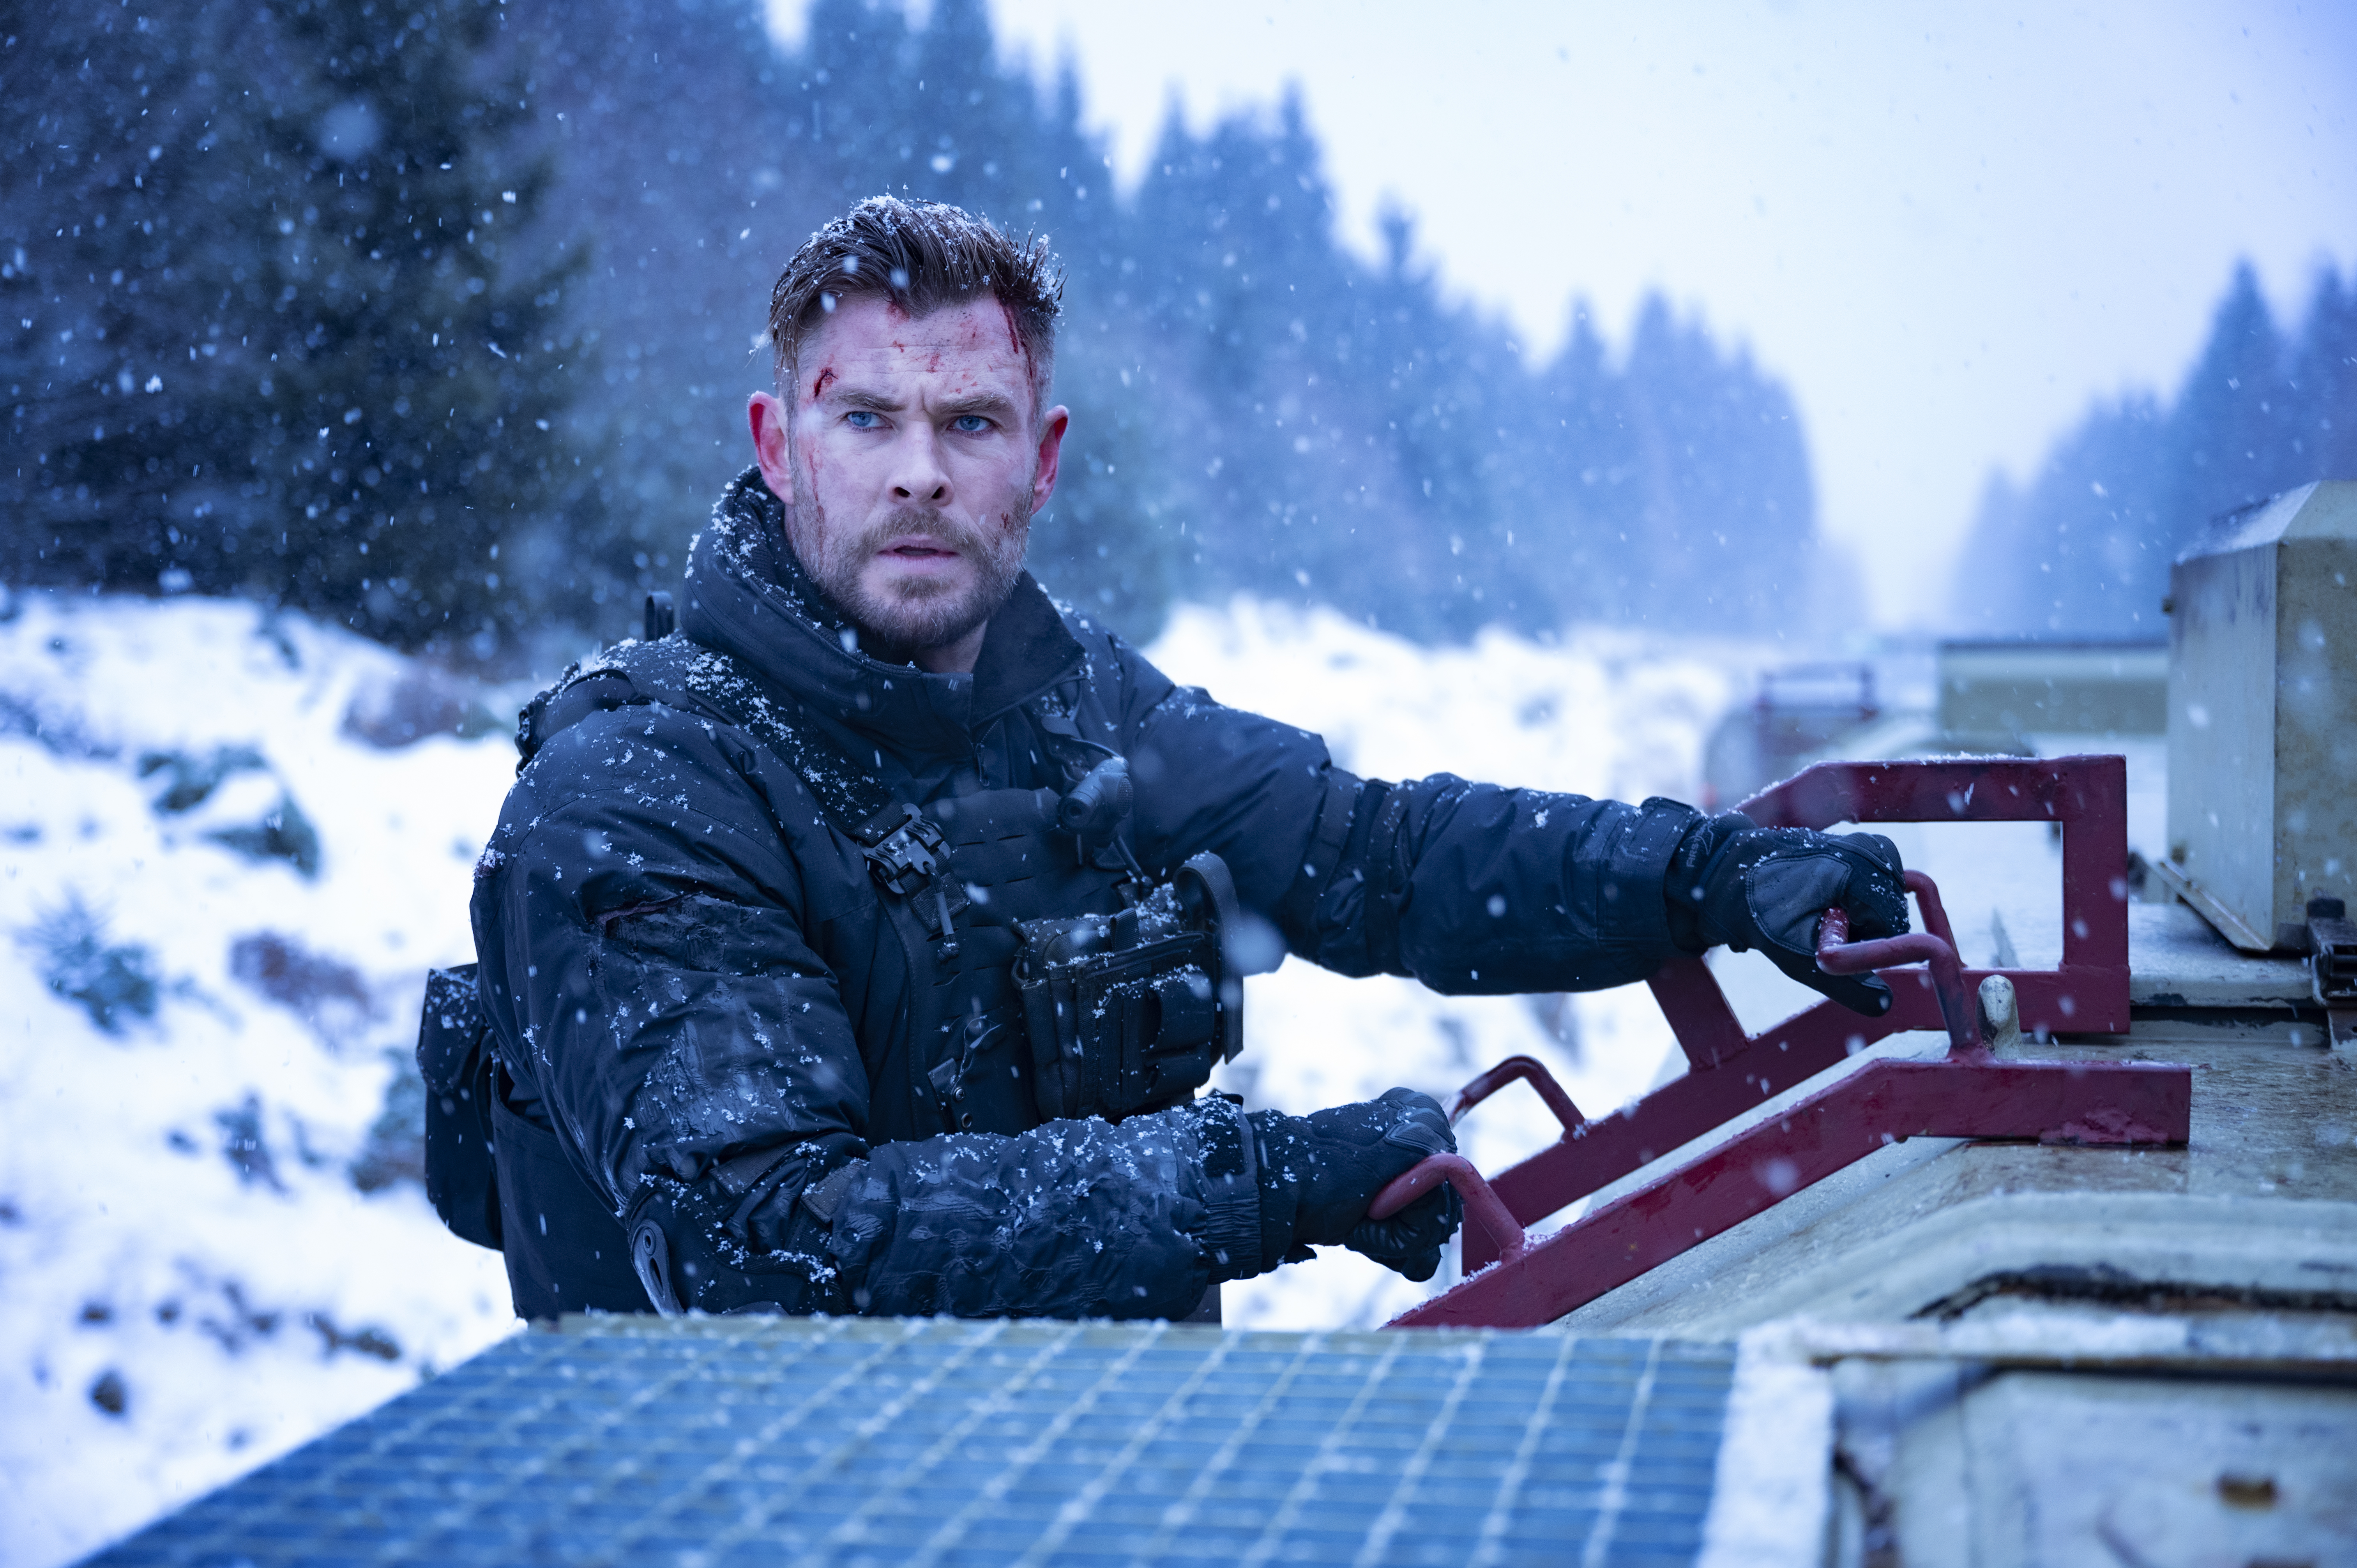 chris hemsworth in the snow. he stands next to a vehicle and looks determined